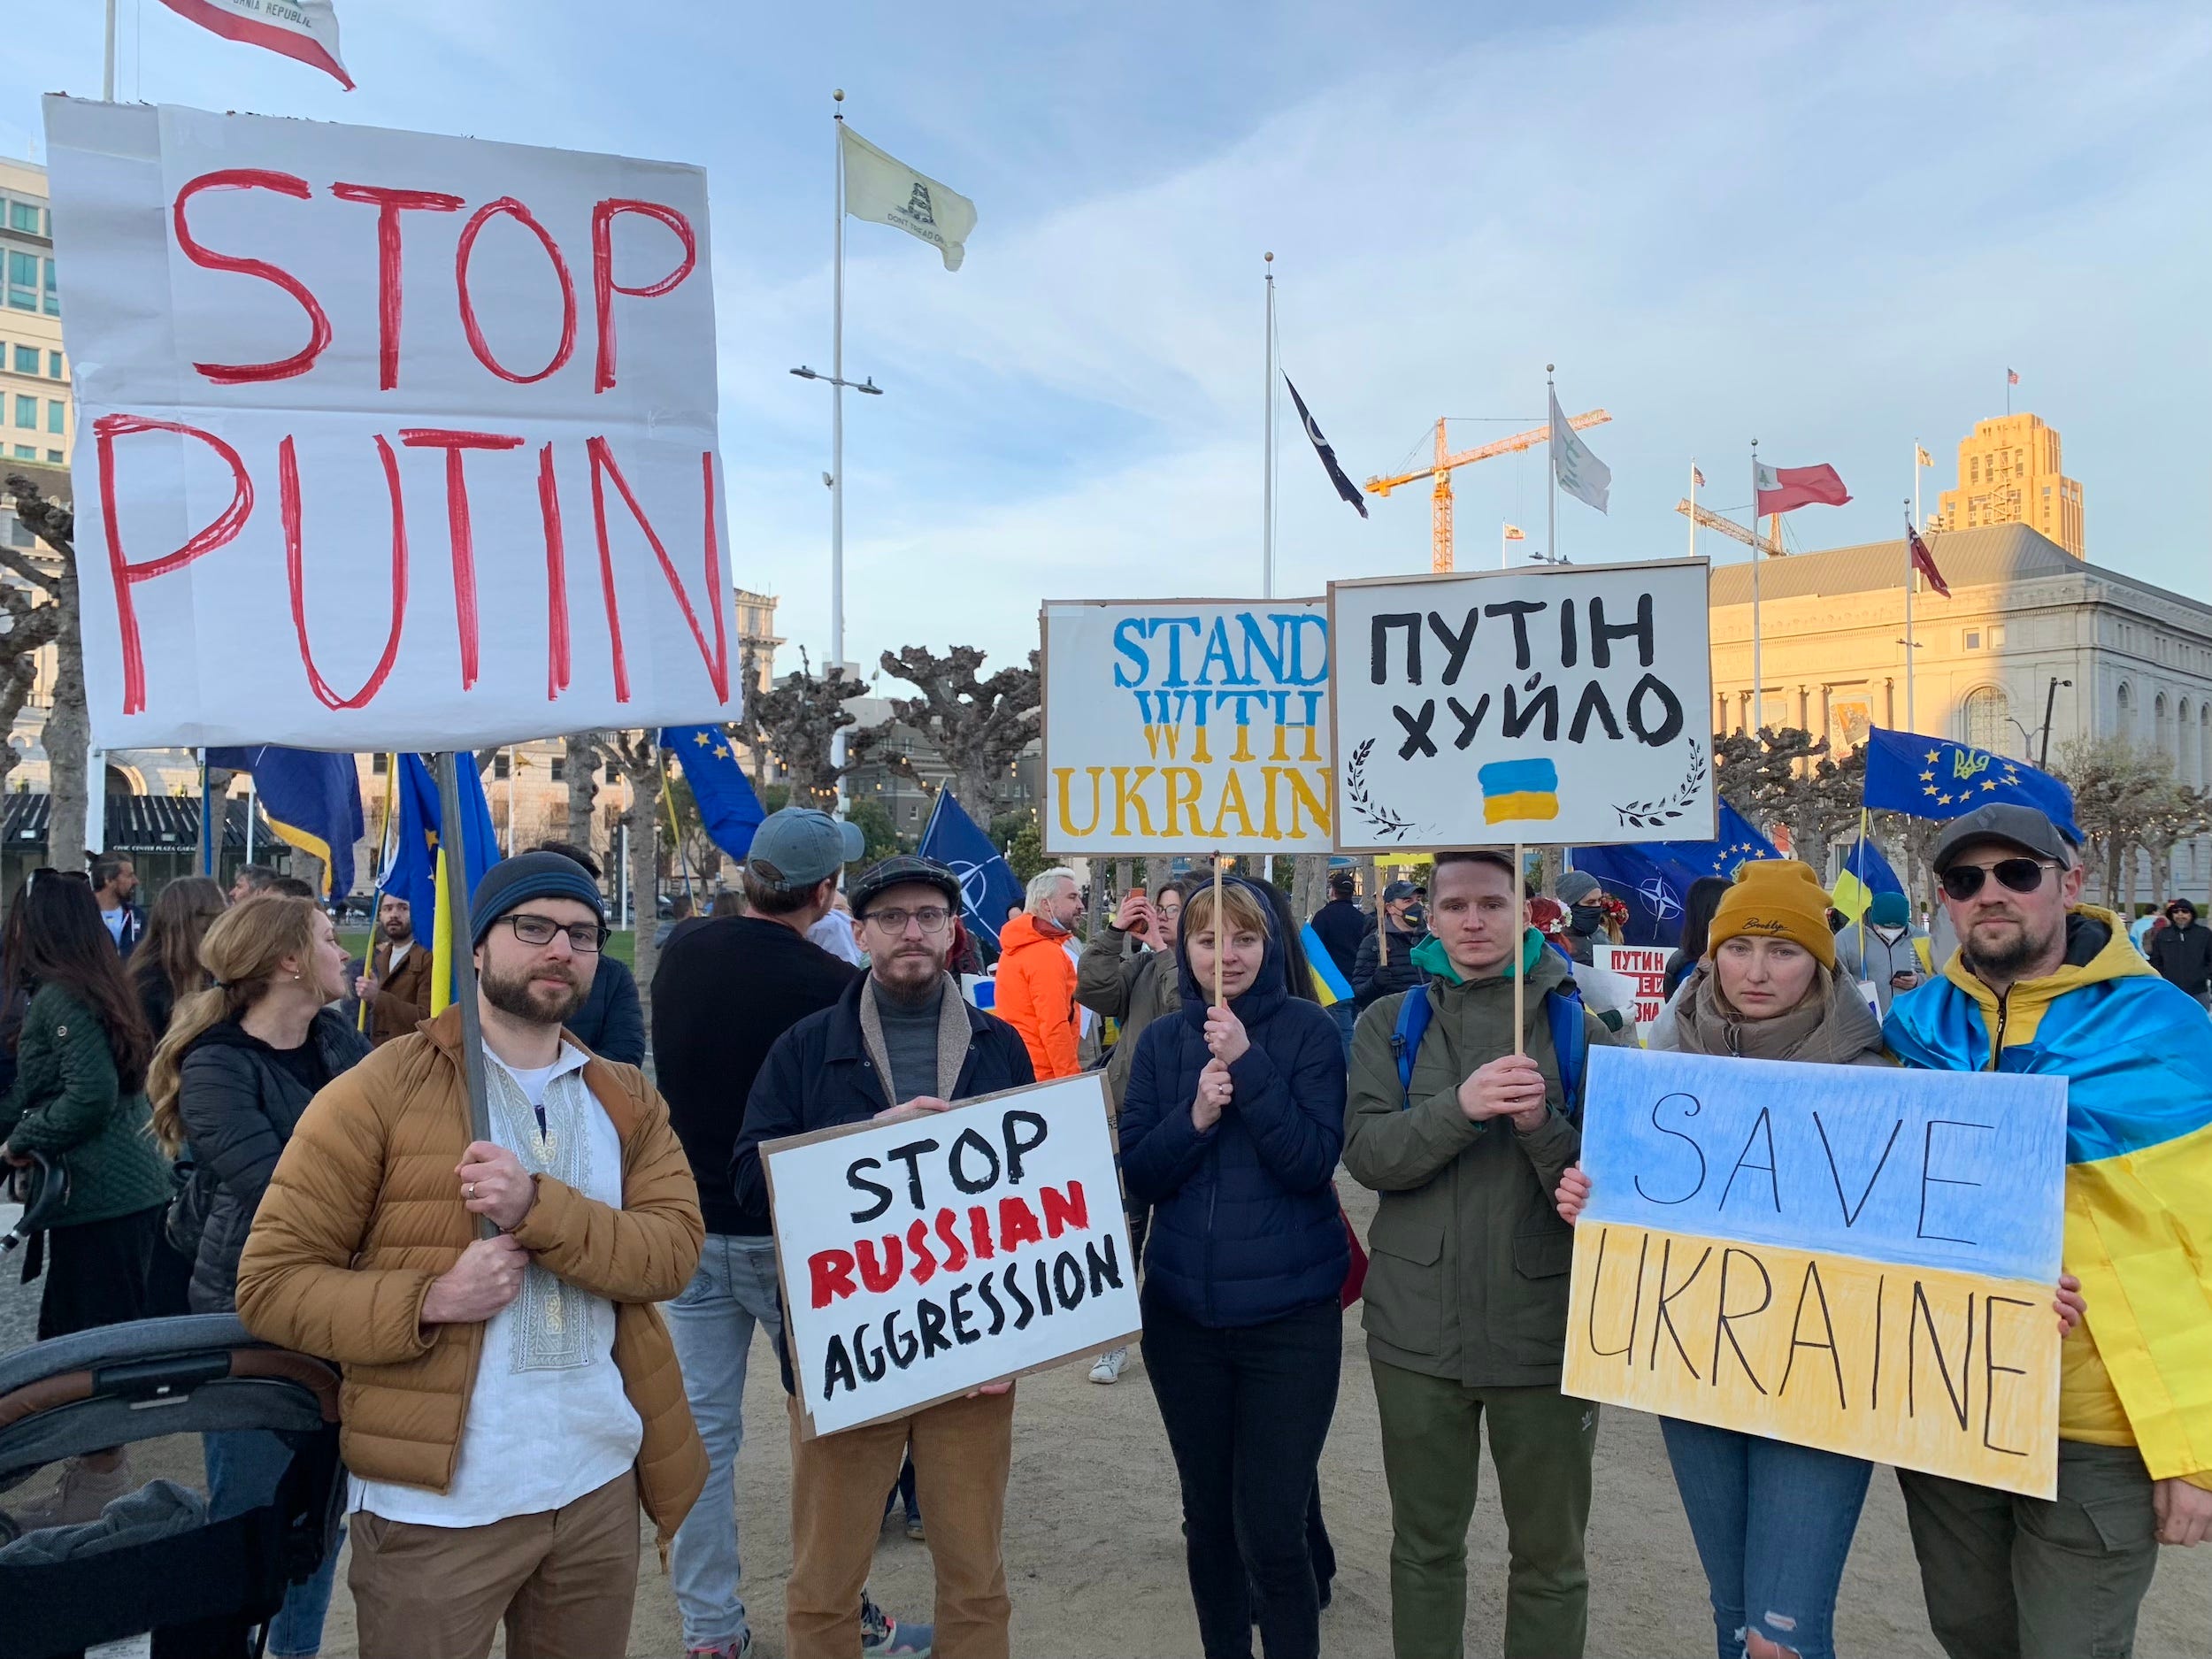 six protestors pose with signs that read "stop putin" "stand with ukraine" "stop russian aggression" and "save ukraine"